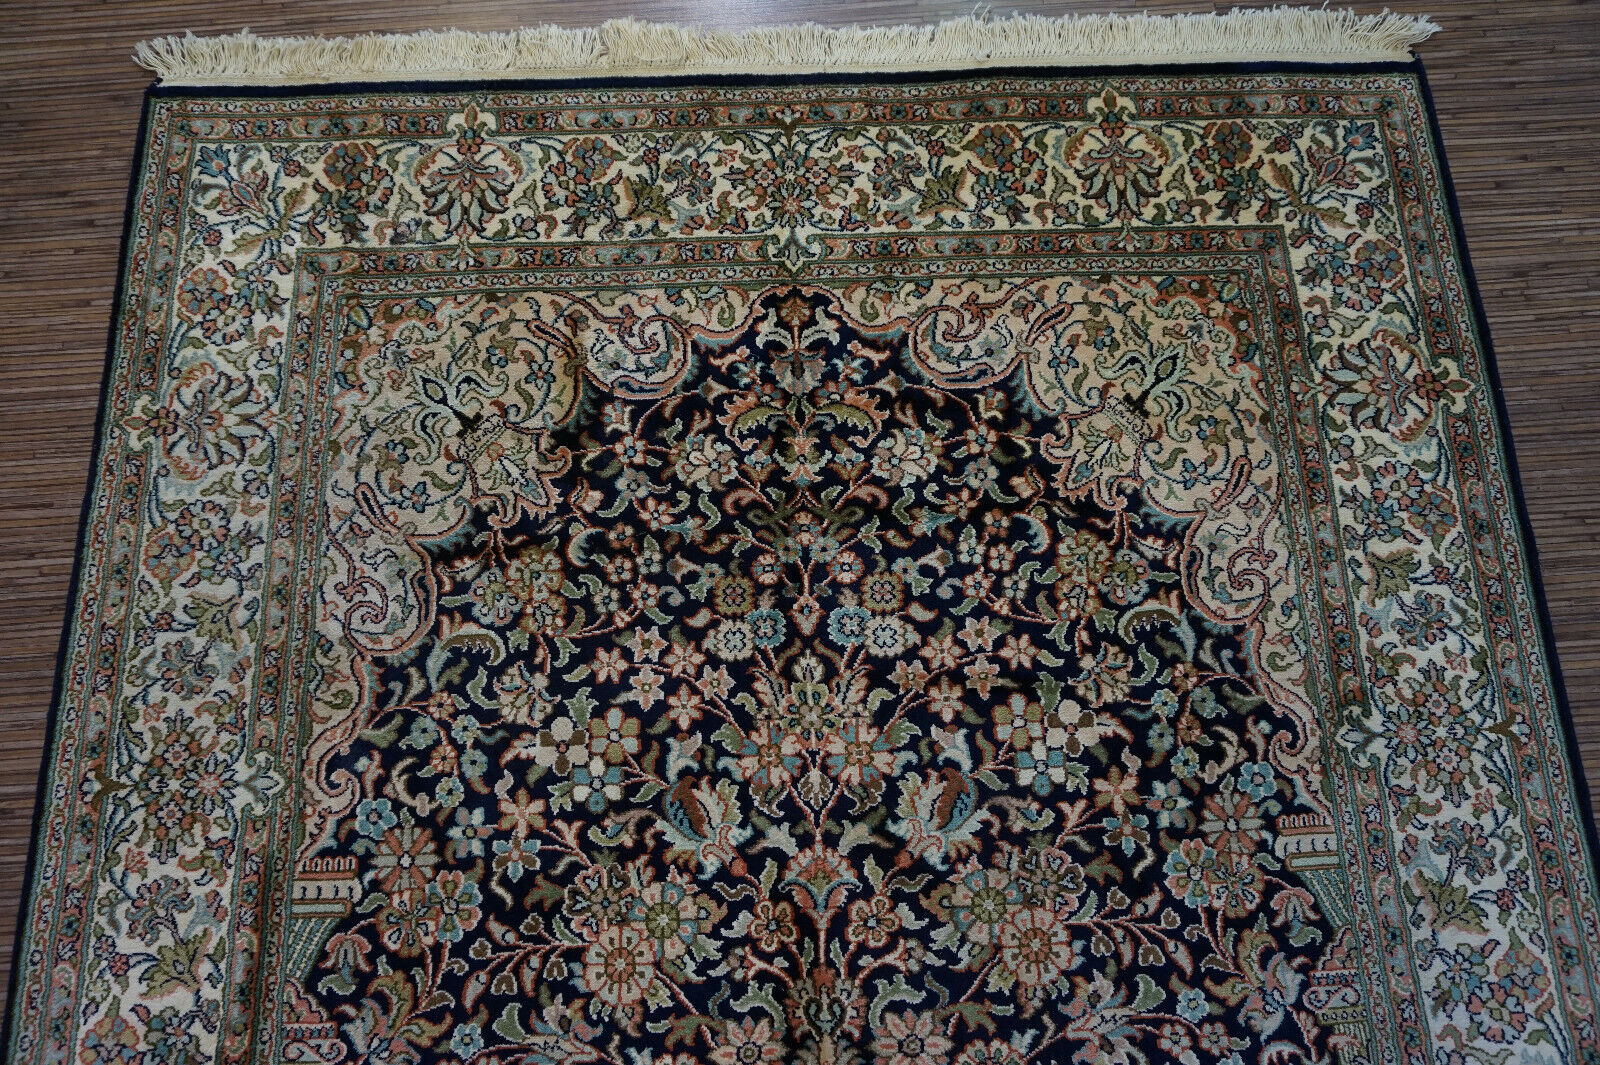 Front view of the Handmade Vintage Persian Kashmir Rug highlighting its spiritual significance